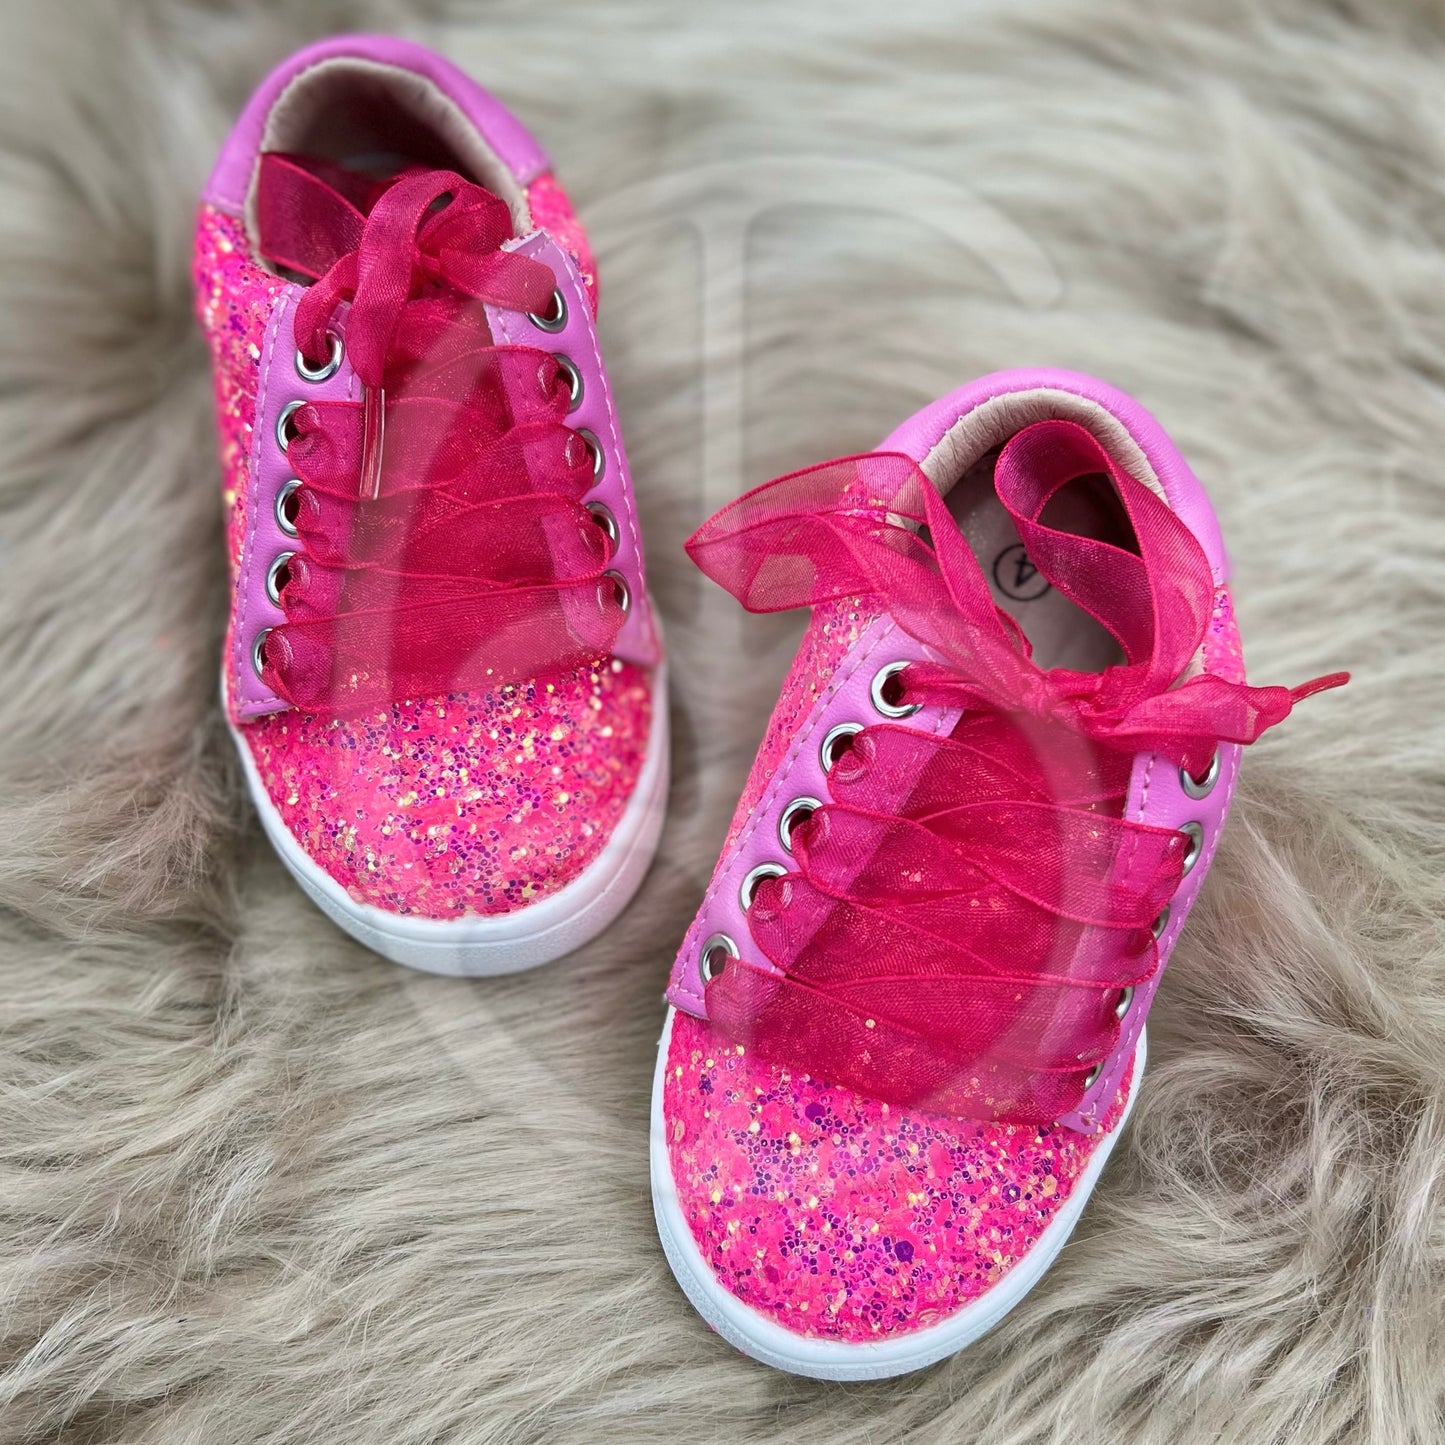 RTS Glam Pink Sneakers